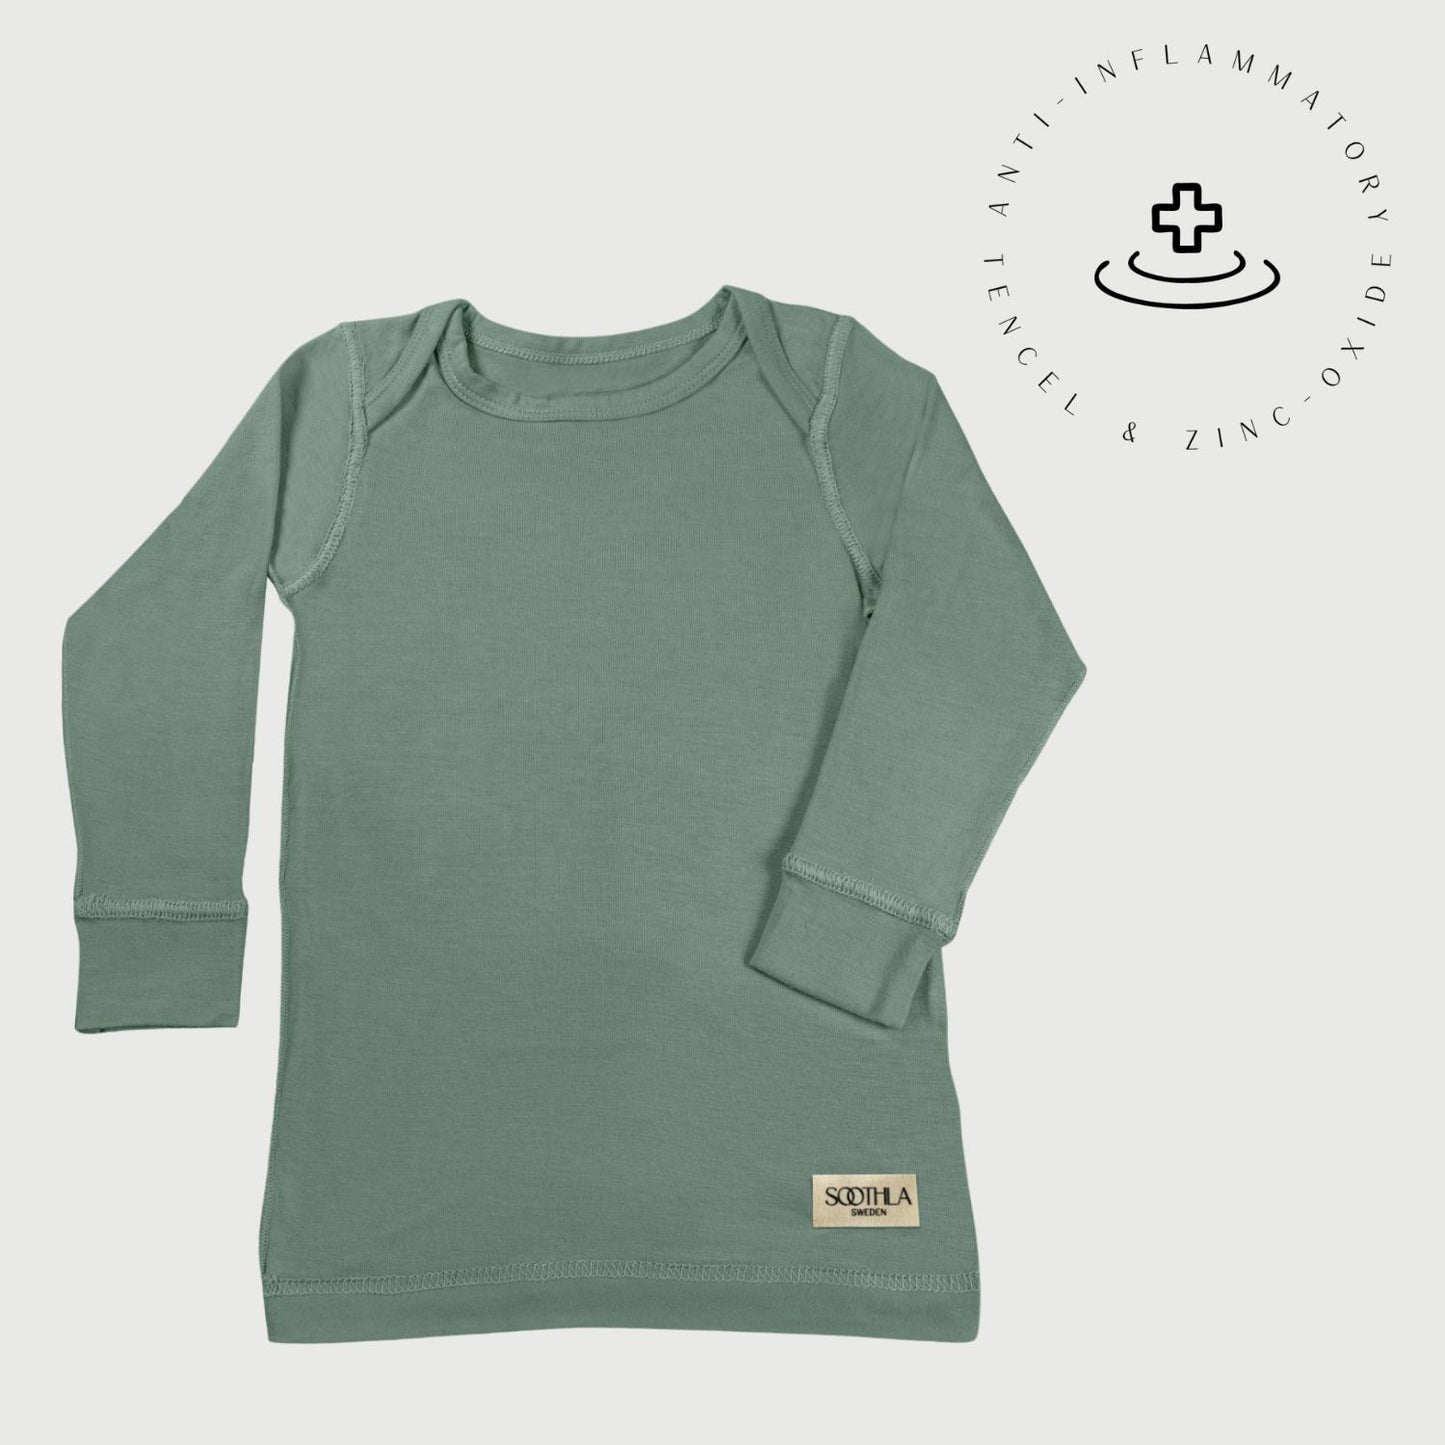 Long-sleeved baby top